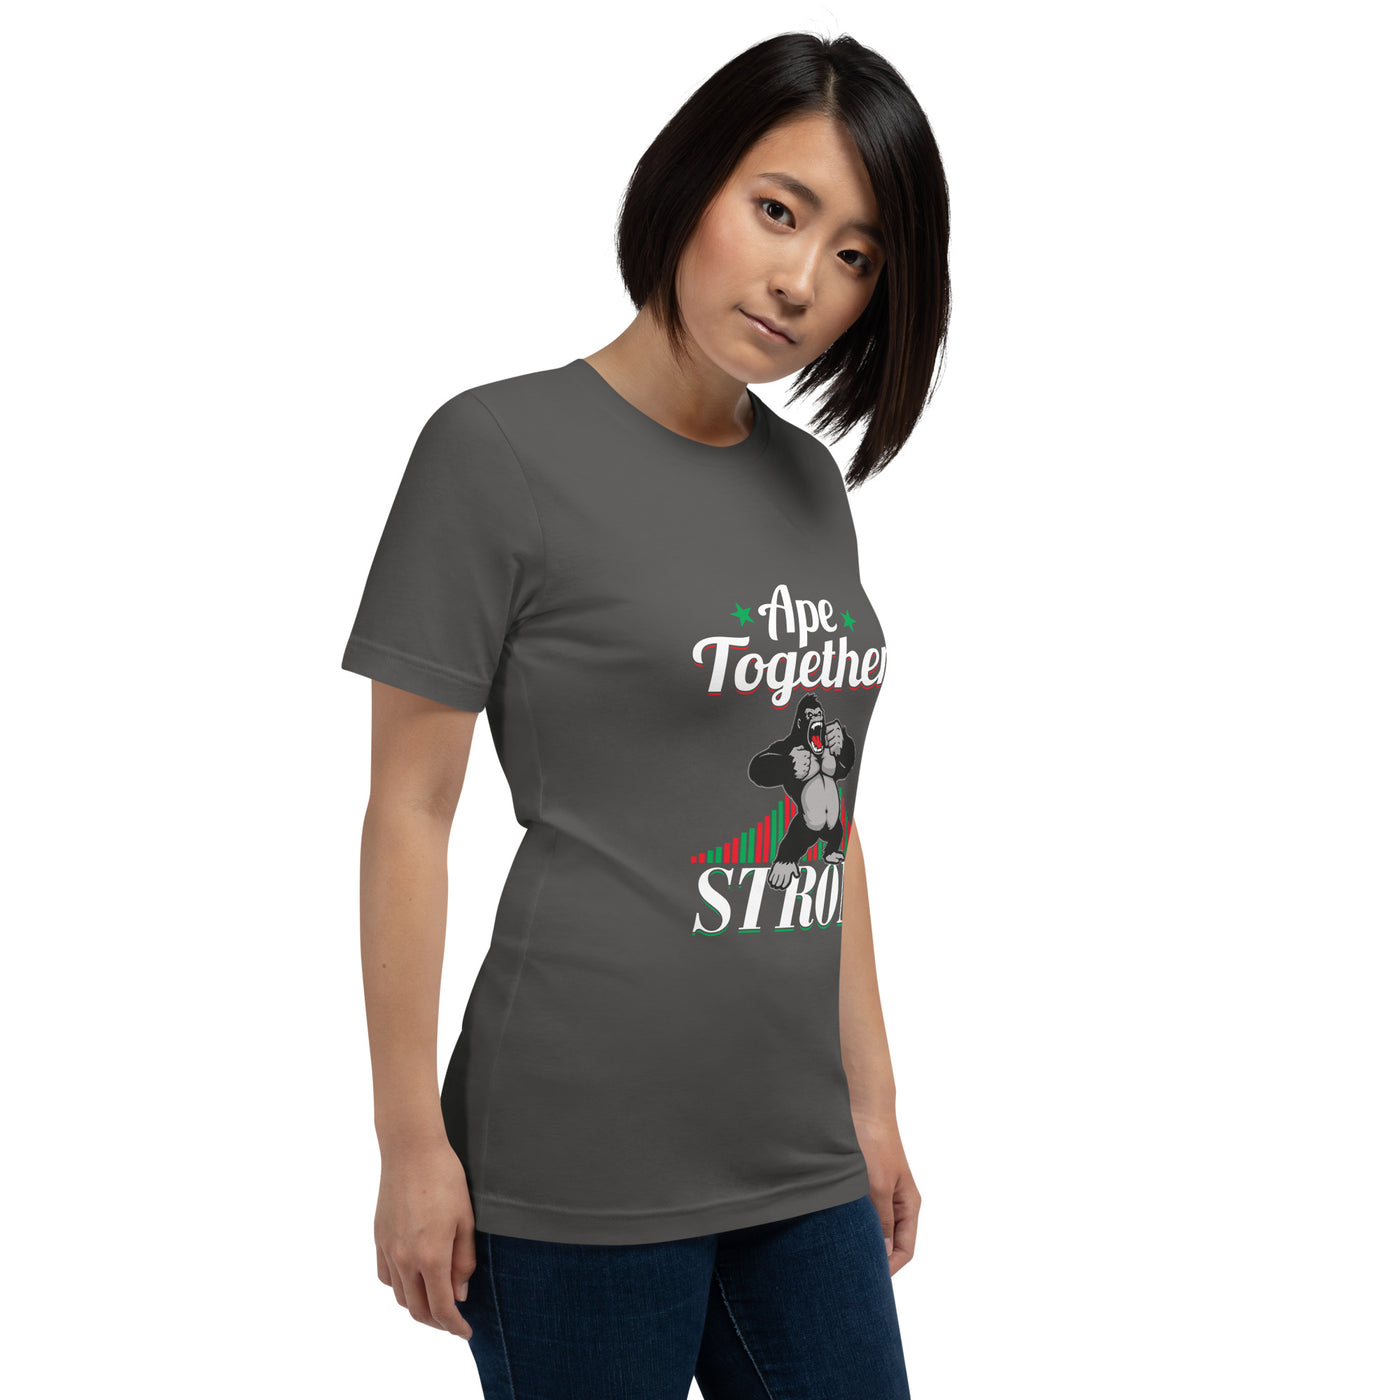 Ape together strong - Unisex t-shirt